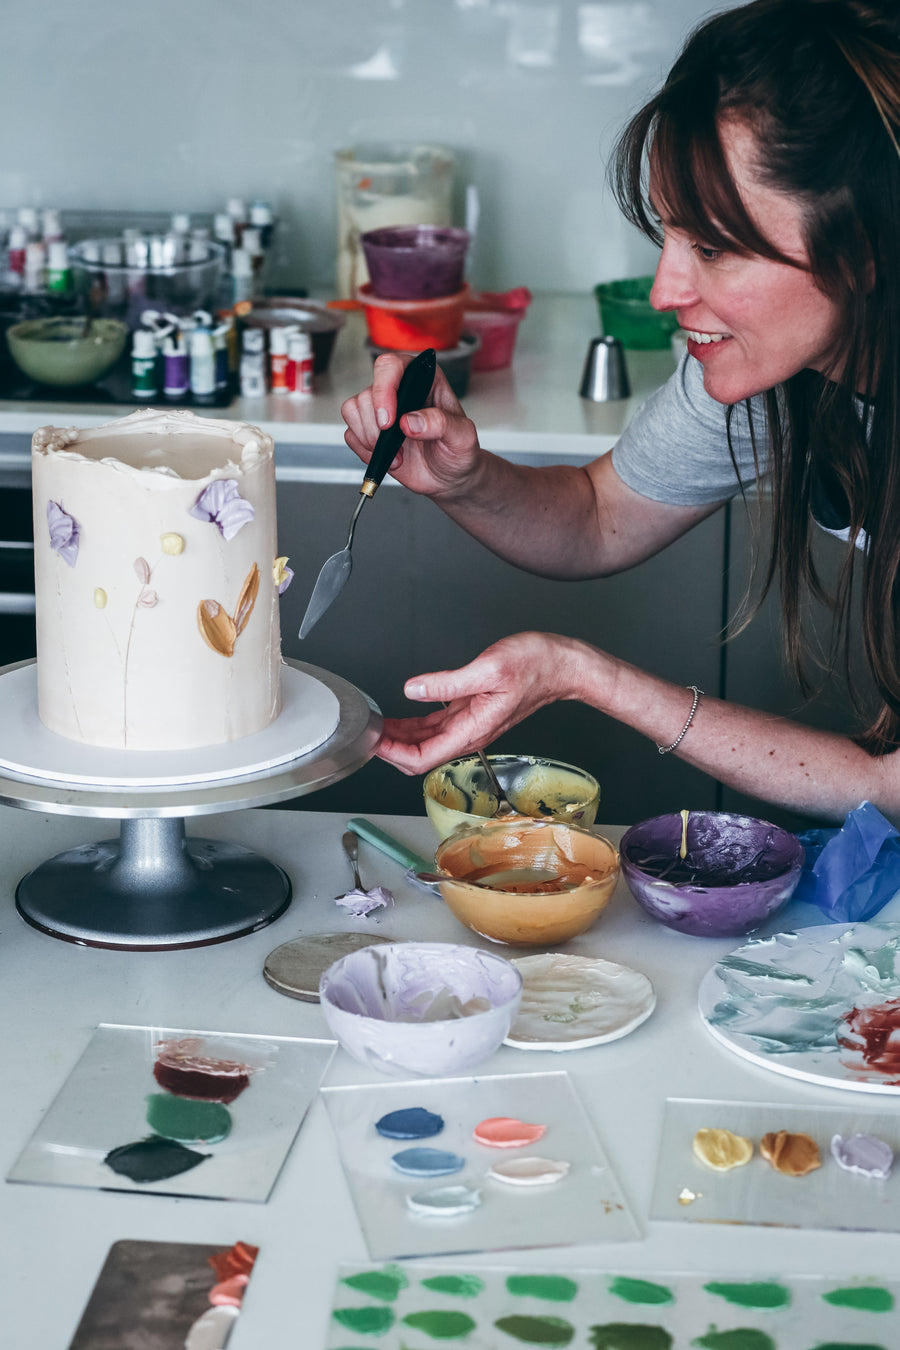 Carol decorating a cake with a unique colour palette made with Colour Mill.